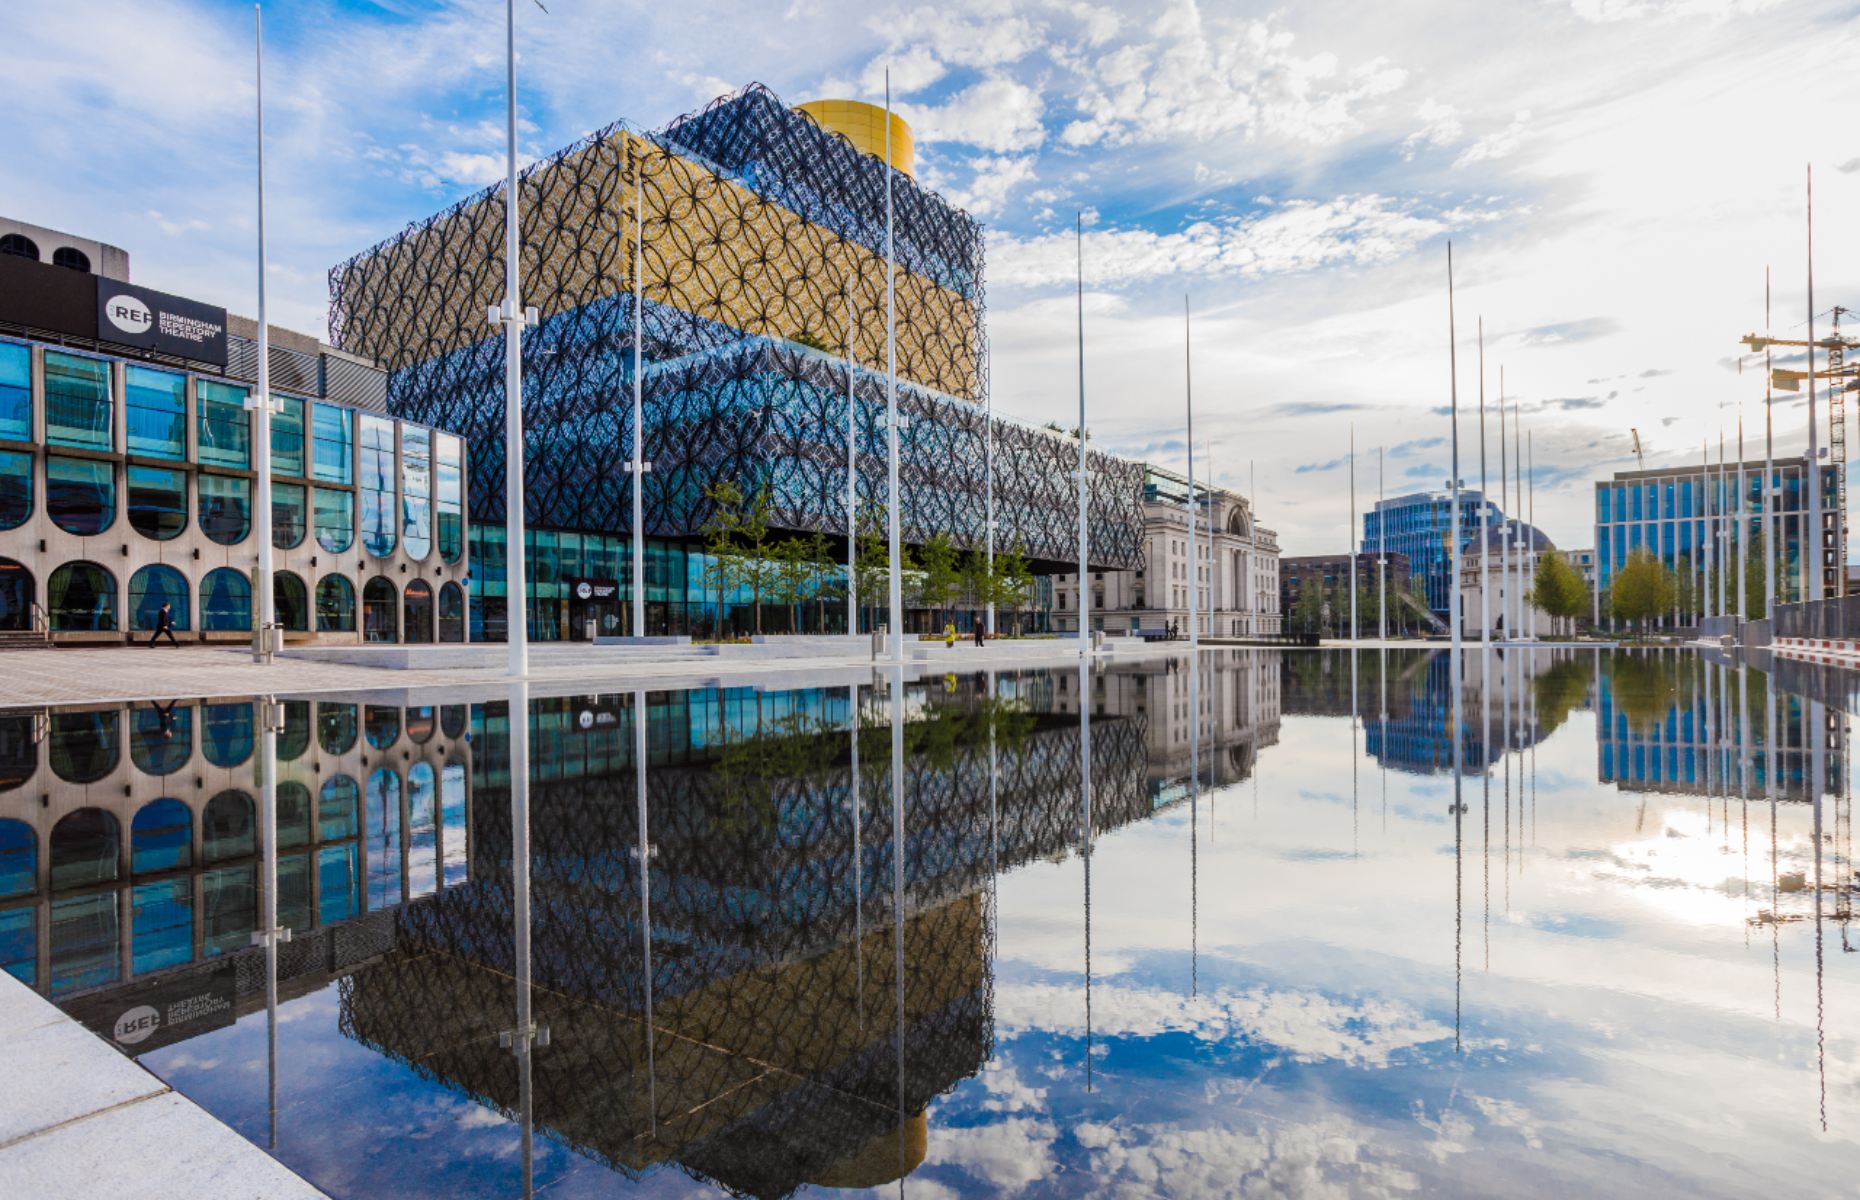 Birmingham Library in the city centre (Image: Ket Sang/Shutterstock)